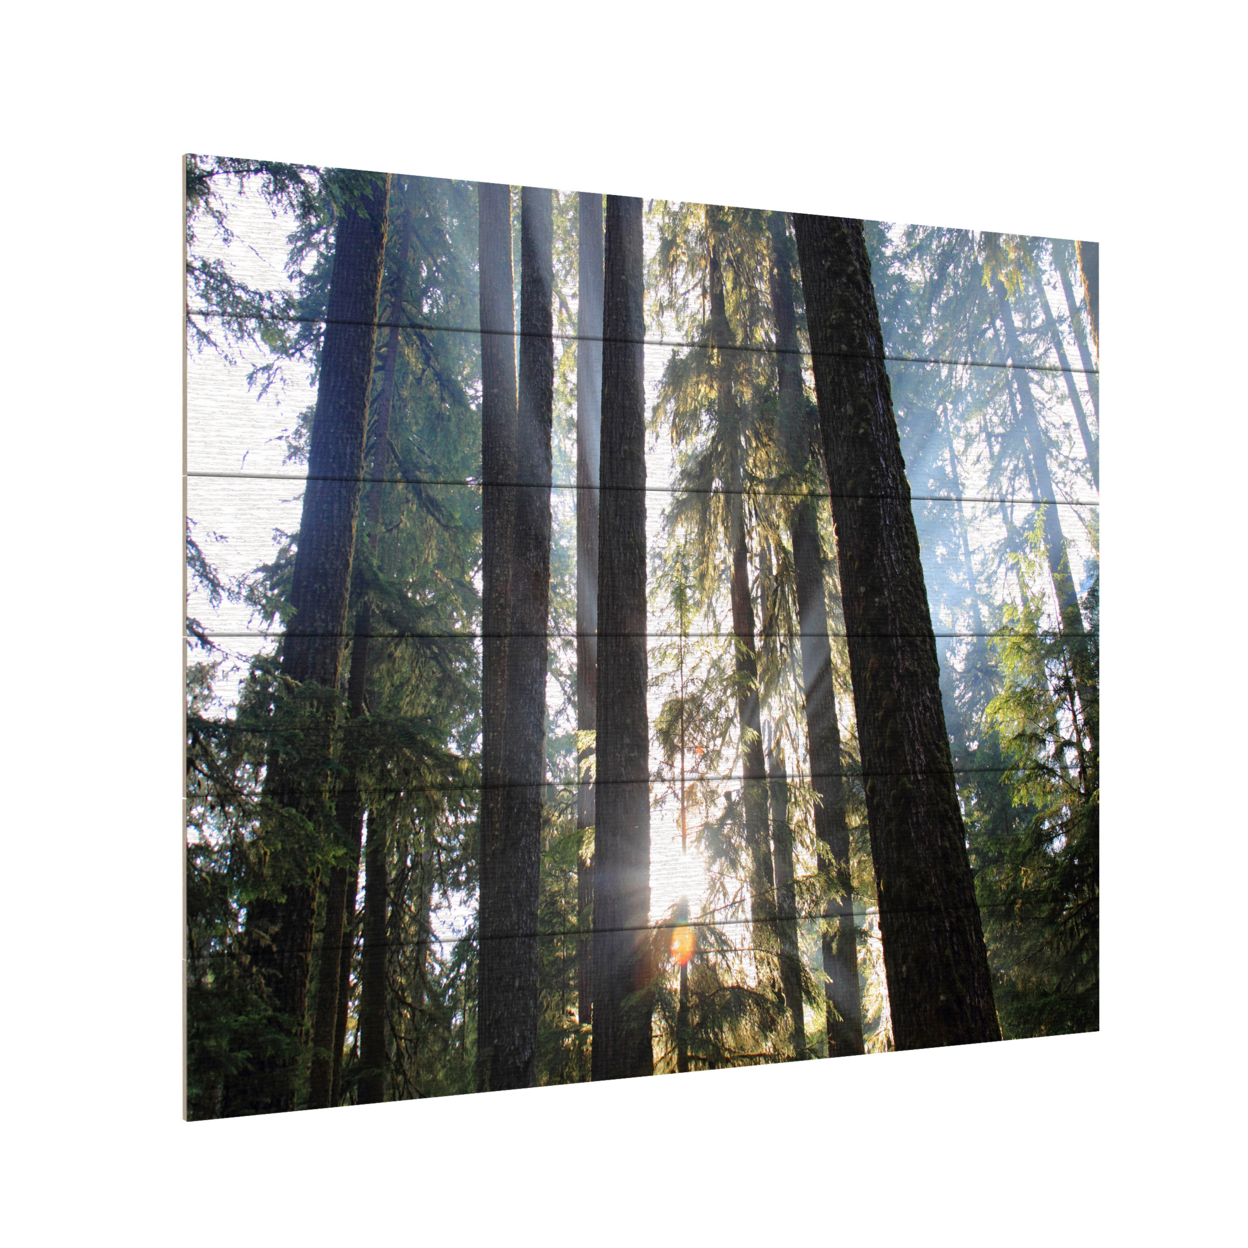 Wooden Slat Art 18 X 22 Inches Titled Sunrays Ready To Hang Home Decor Picture